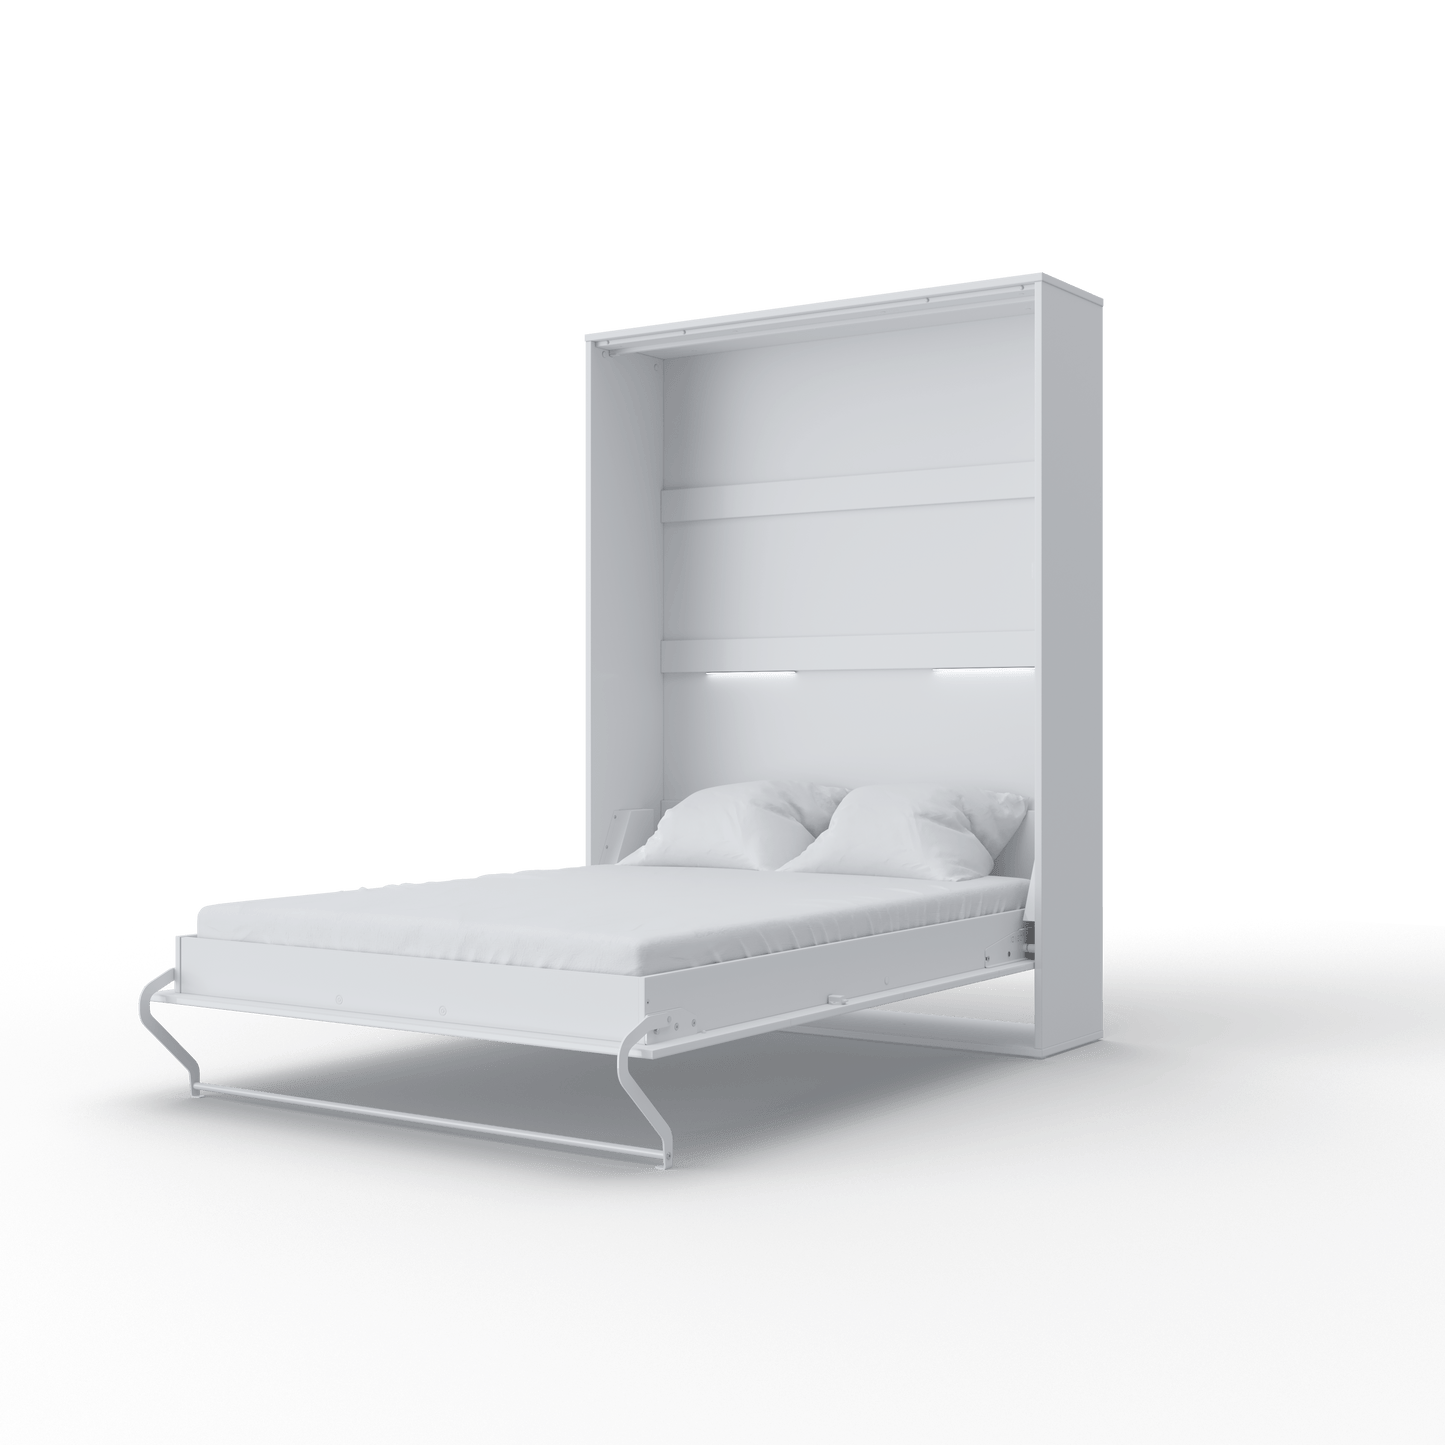 Invento Vertical European FULL XL Wall Bed with LED